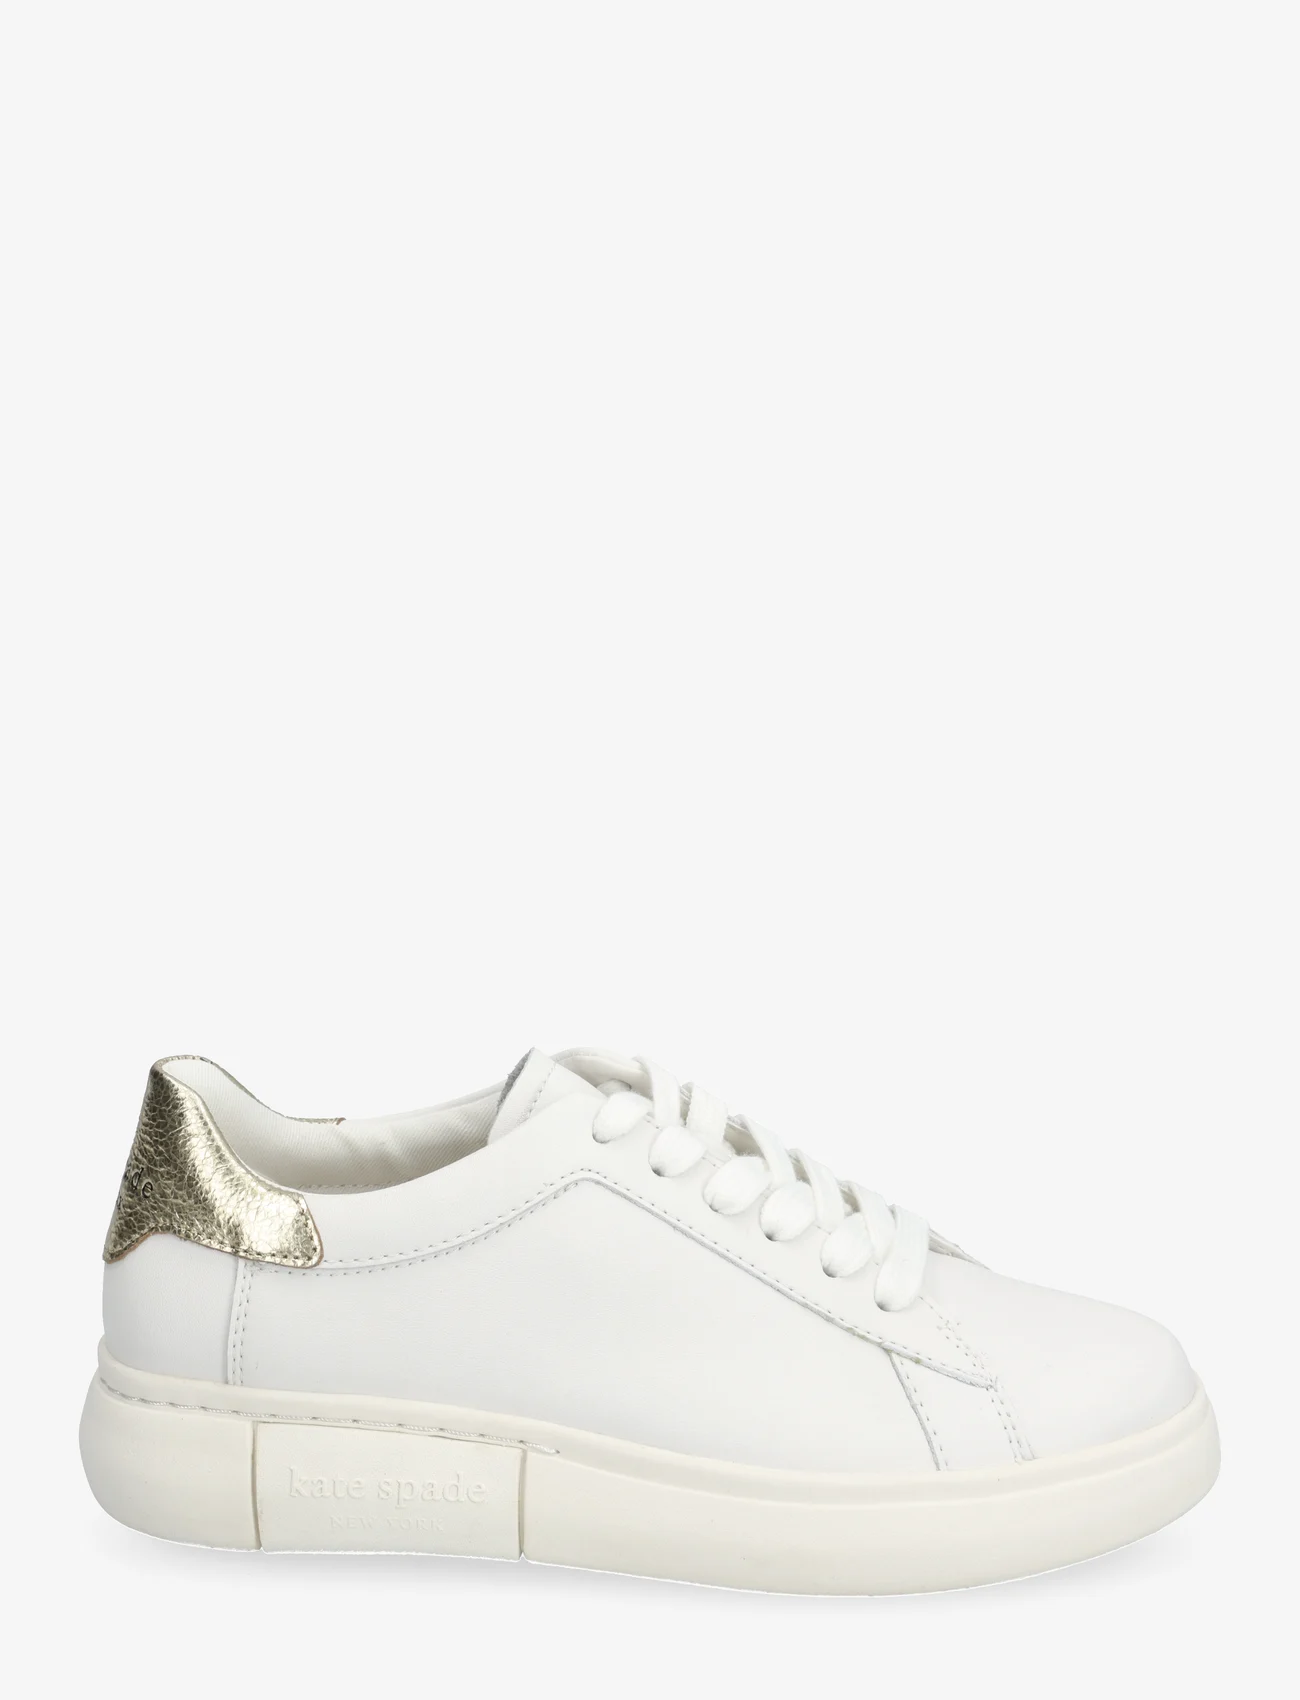 Kate Spade - LIFT - low top sneakers - optic white/pale gold - 1